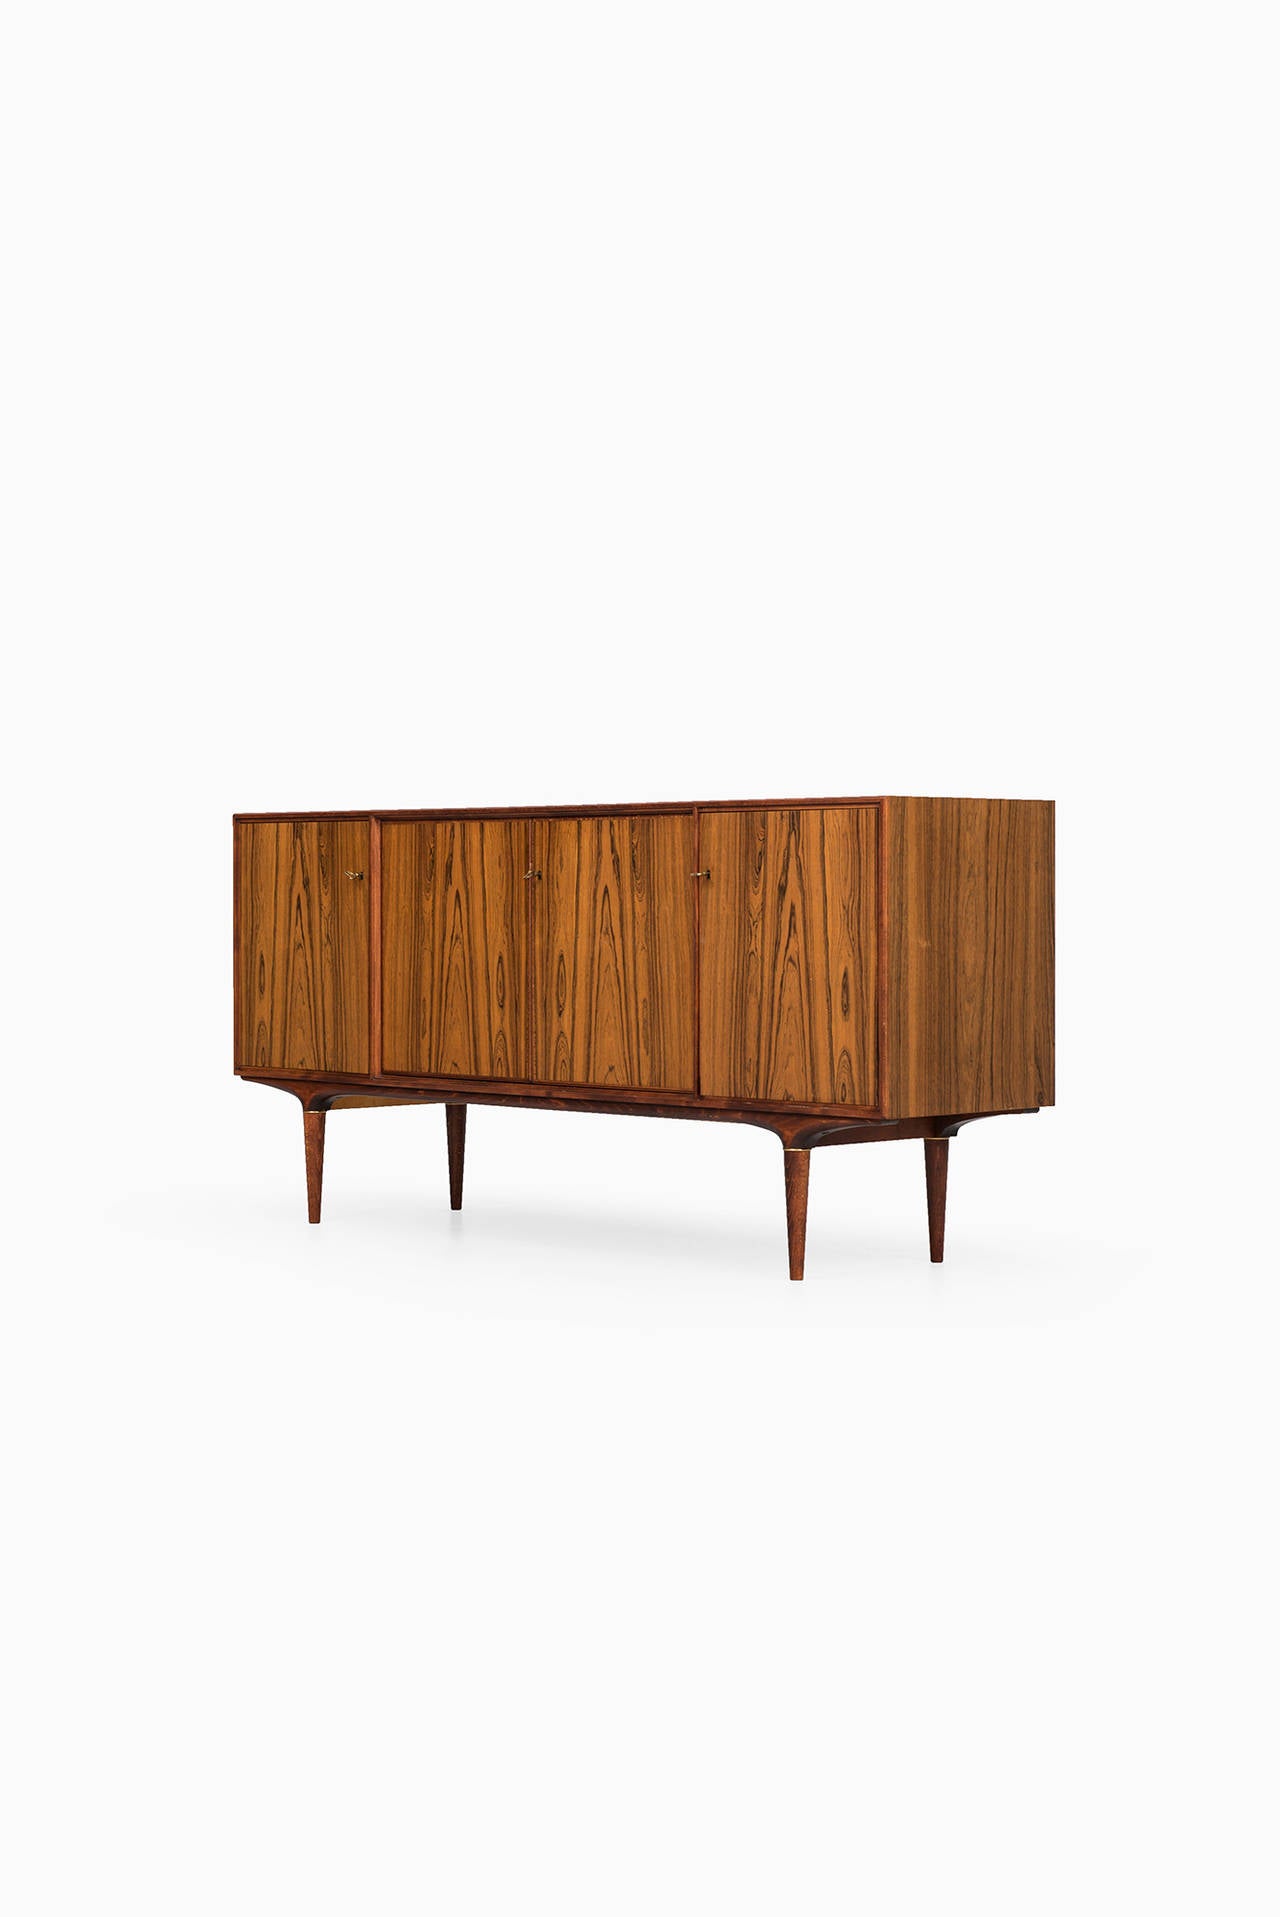 Svante Skogh Sideboard Model Cortina in Rosewood and Brass In Excellent Condition In Limhamn, Skåne län